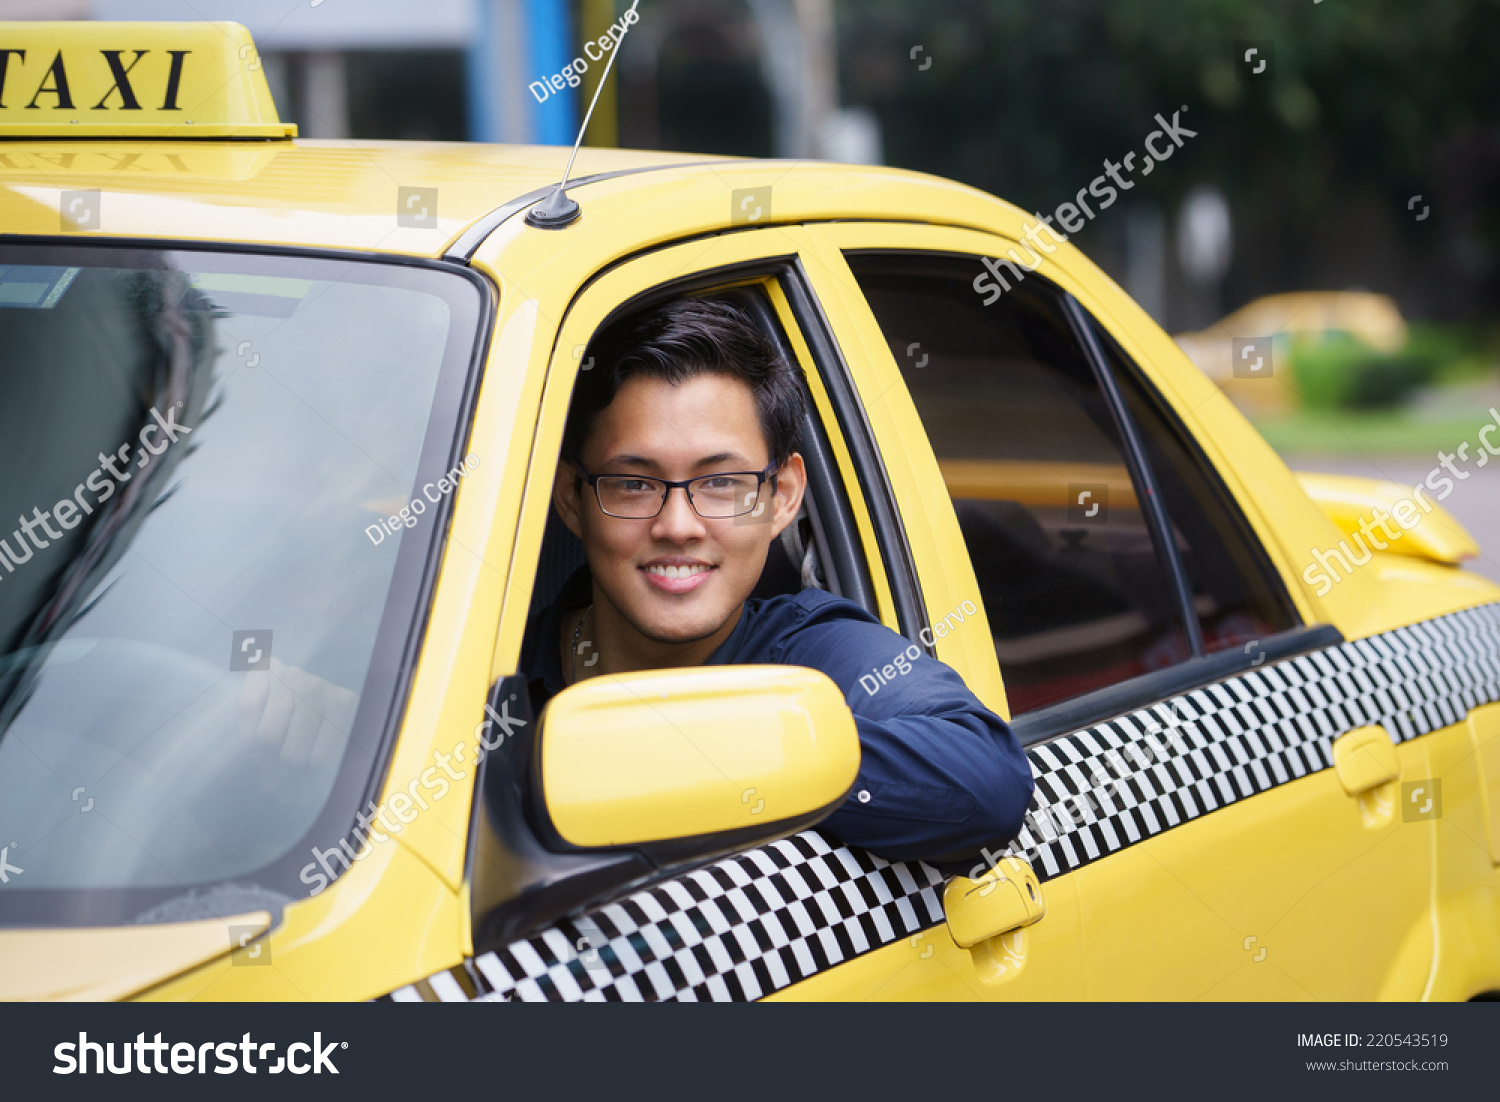 Portrait of happy chinese taxi driver in yellow car smiling and looking at camera #220543519